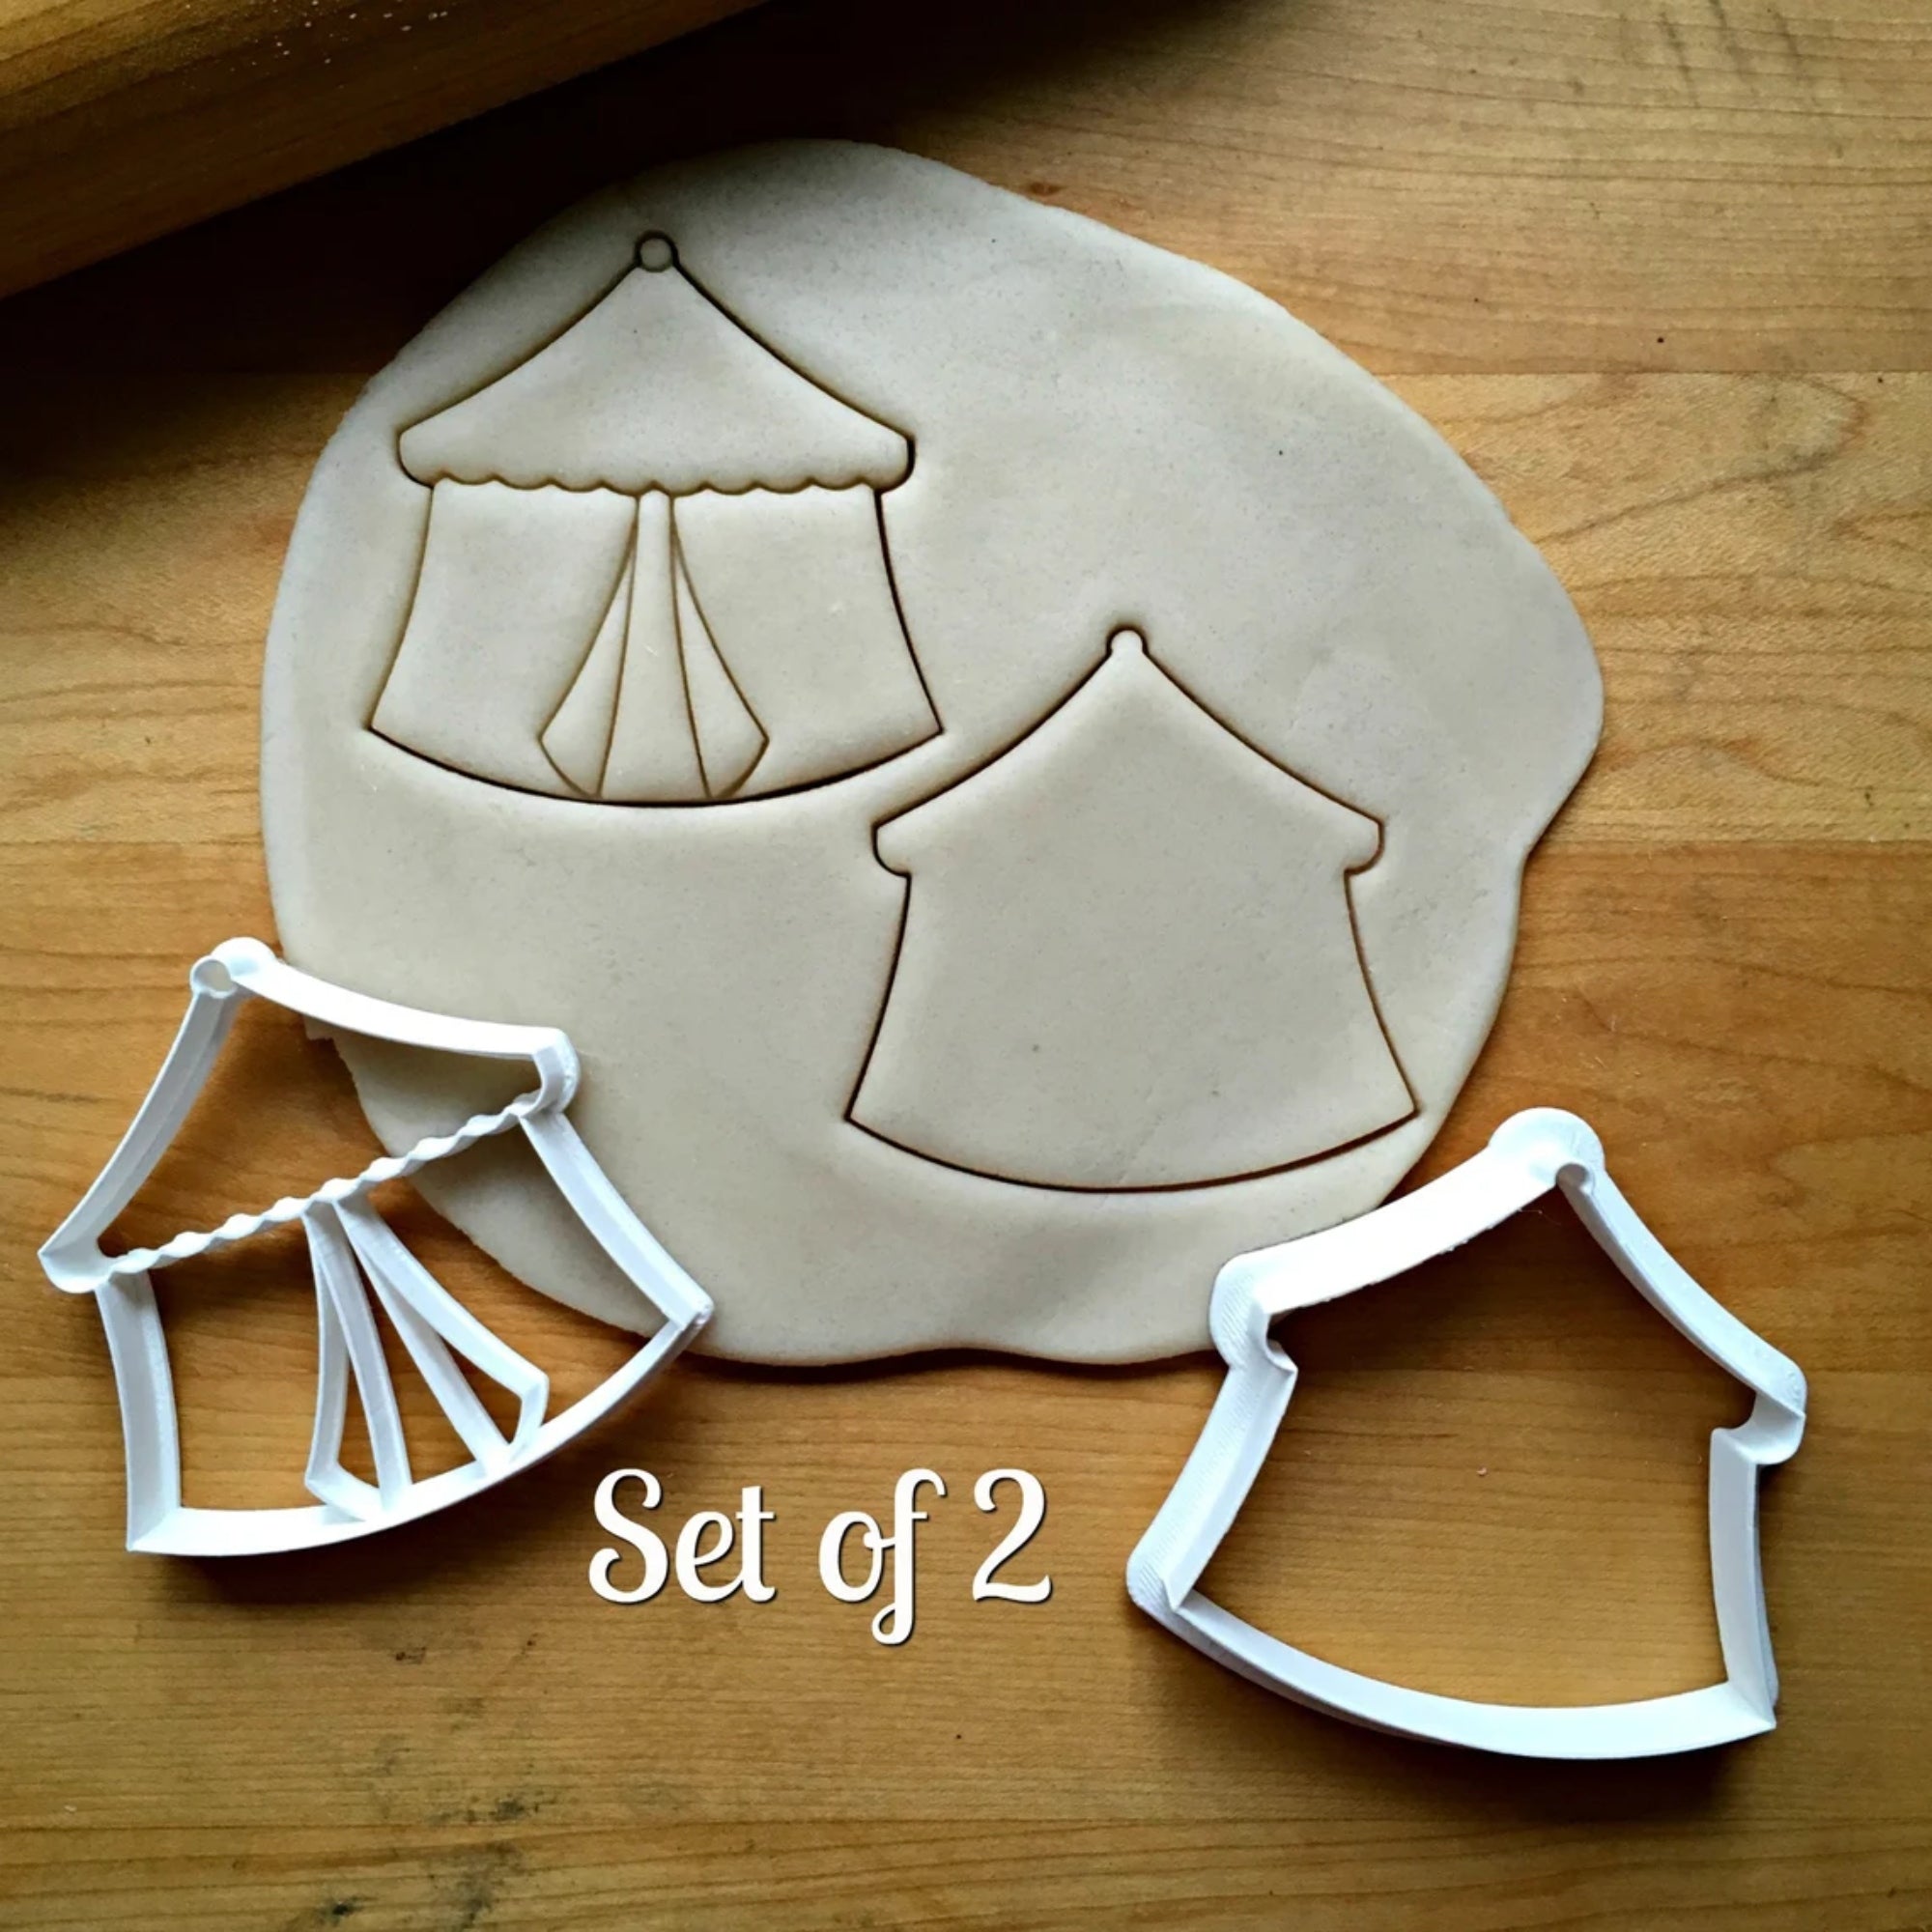 Set of 2 Circus Tent Cookie Cutters/Dishwasher Safe